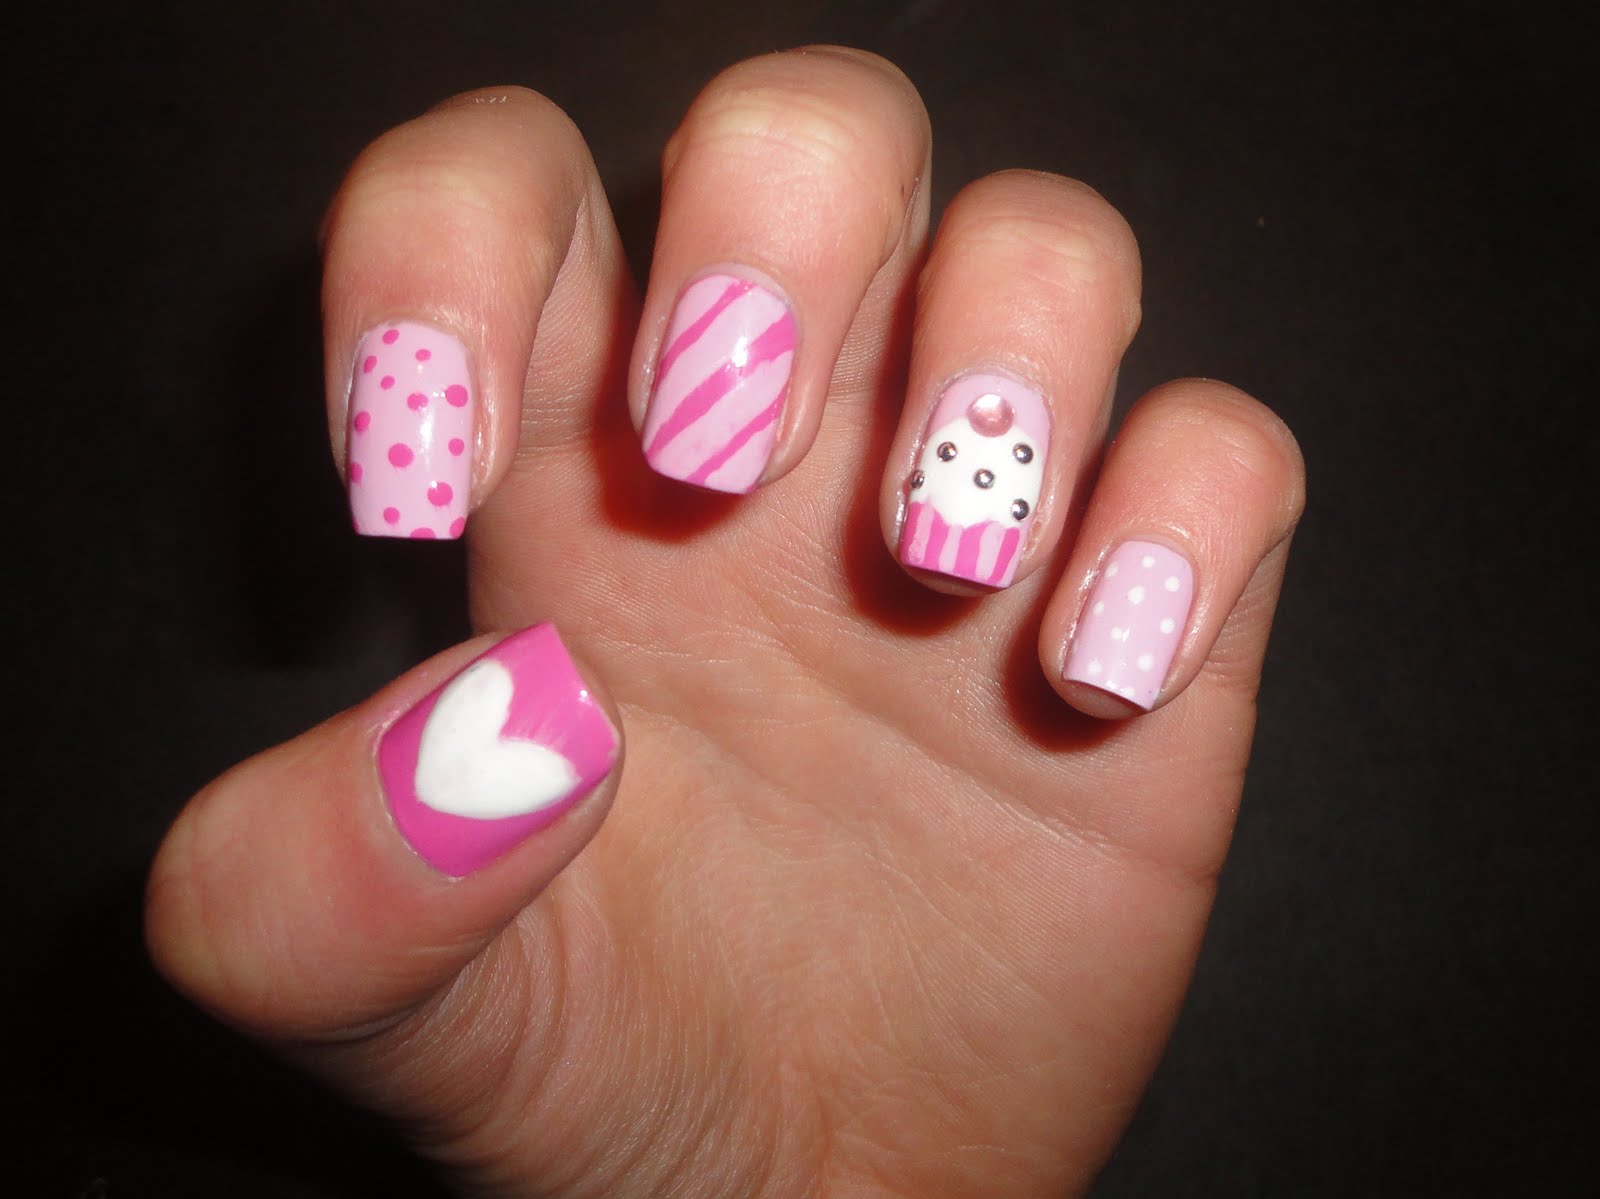 Beautiful and Easy Nail Polish Design
3. 30 Cute and Easy Nail Designs for Beginners - wide 8